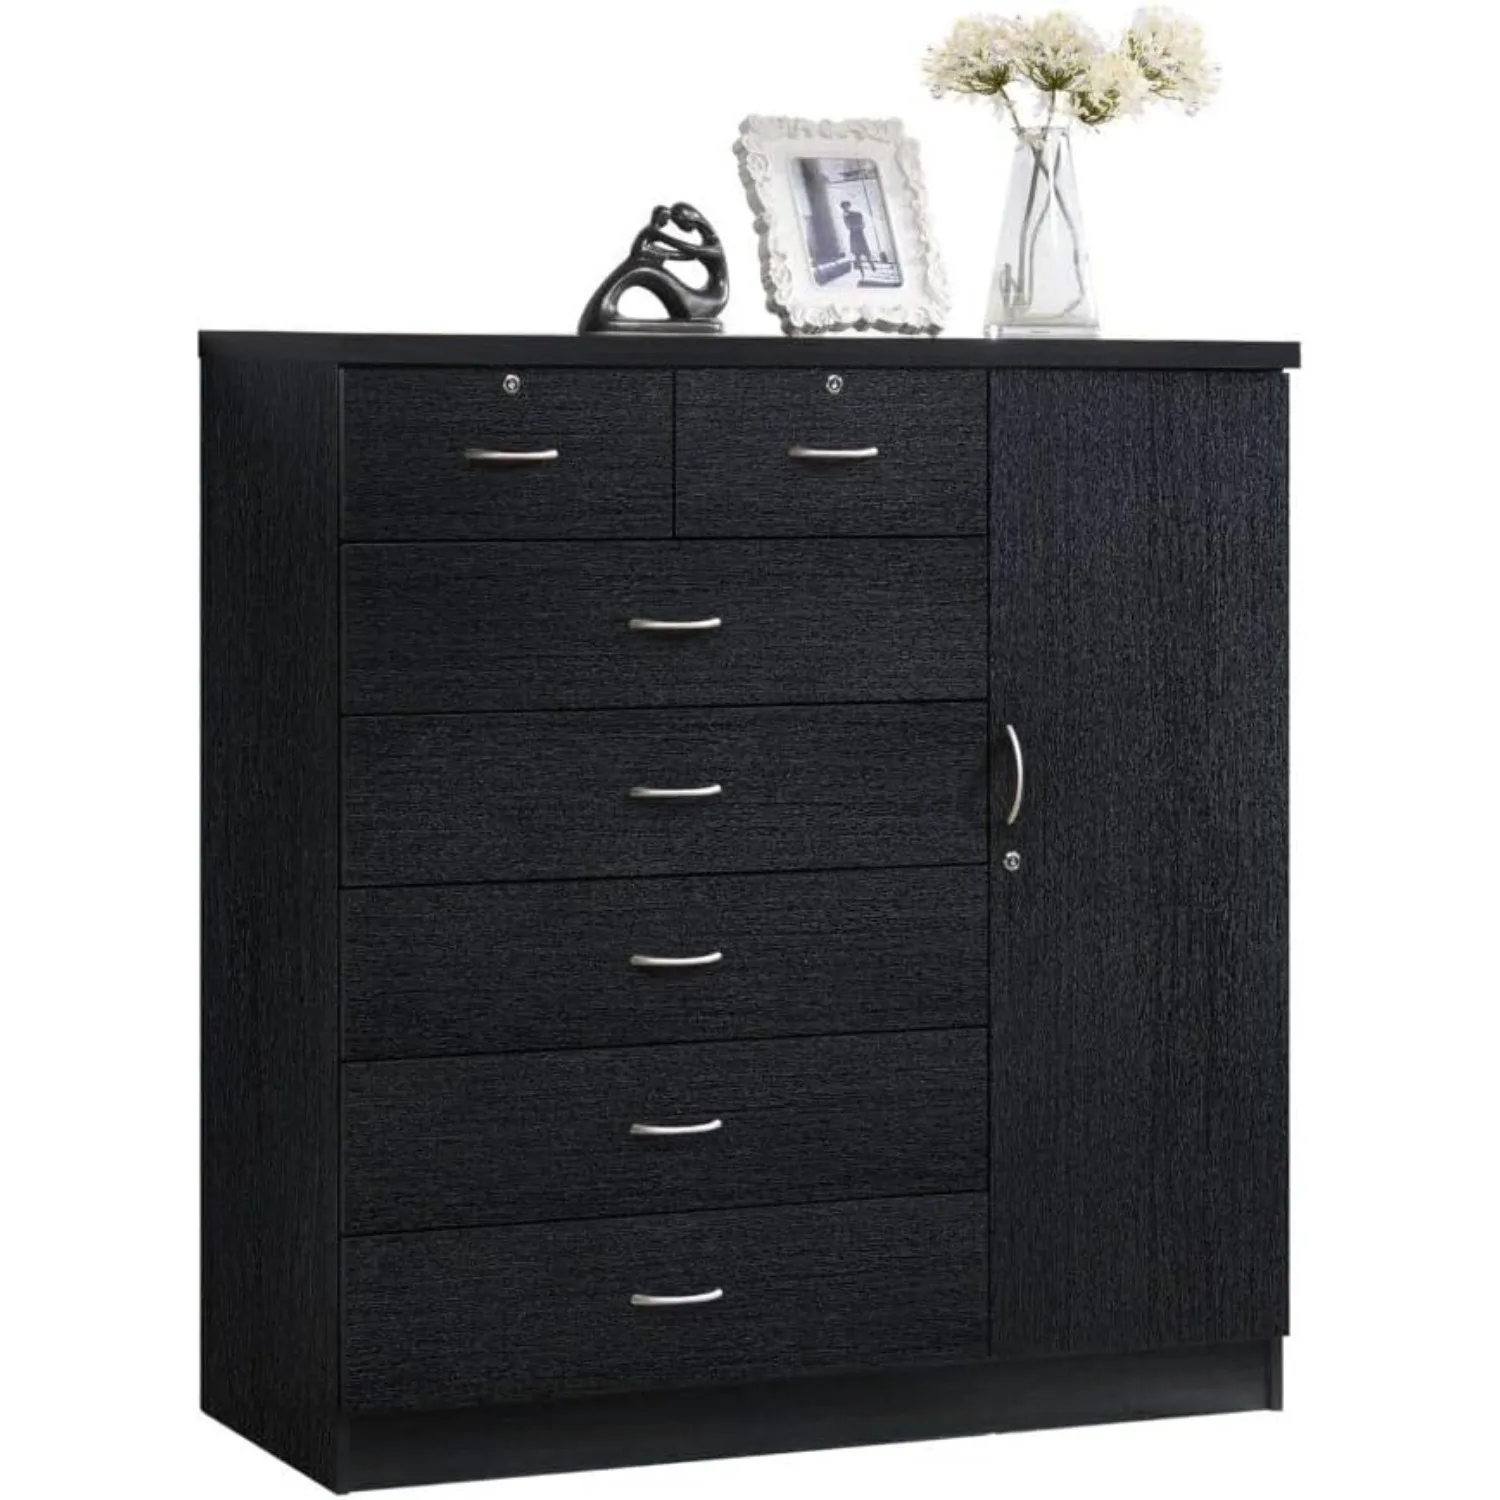 

Hodedah 7 Drawer Jumbo Chest, Five Large Drawers, Two Smaller Drawers with Two Lock, Hanging Rod, and Three Shelves | Black